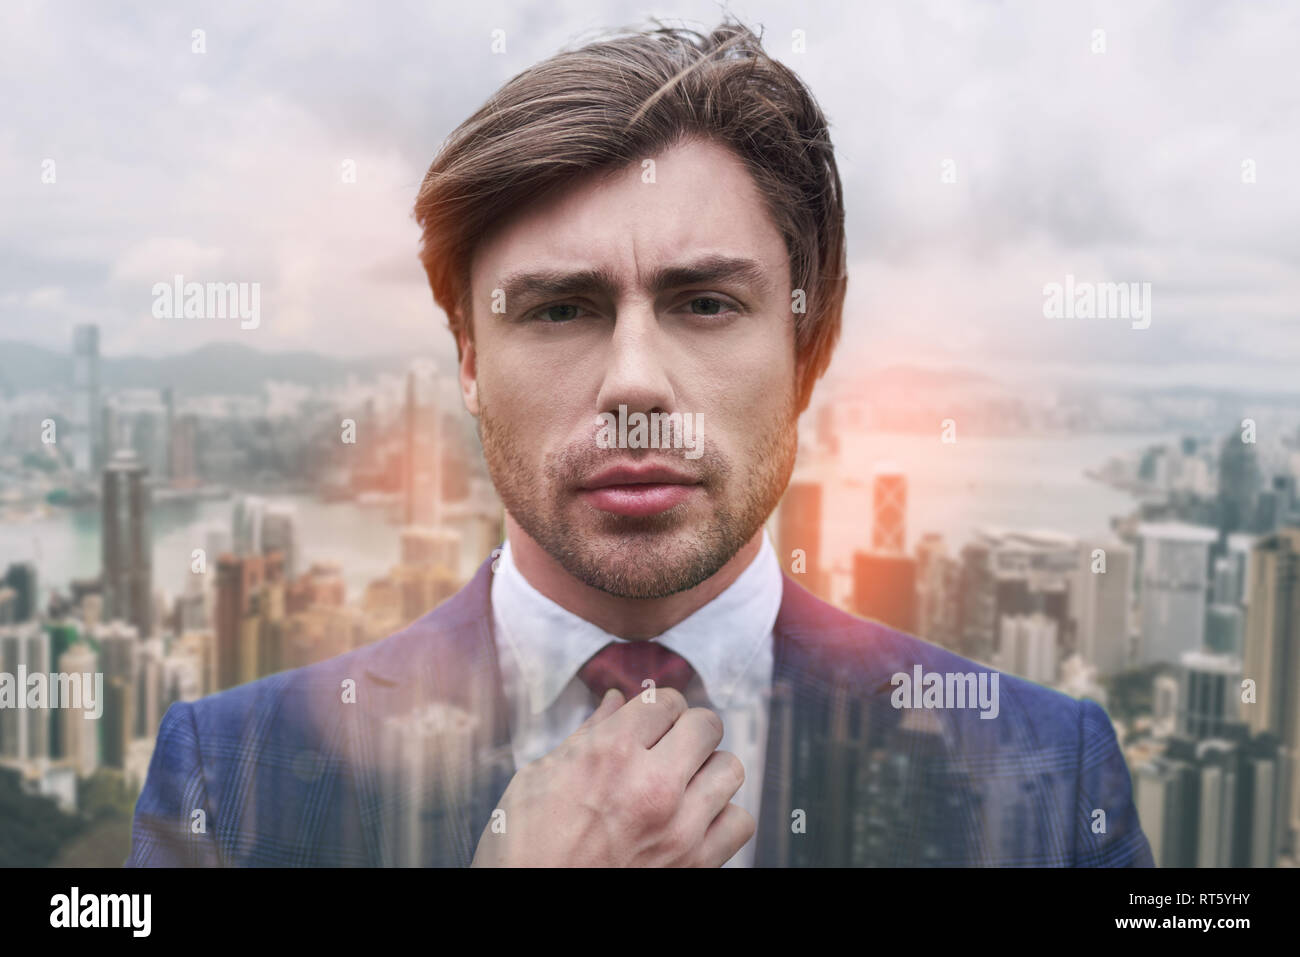 Totally handsome. Close-up portrait of handsome young businessman adjusting his necktie while standing against of cityscape background. Business style. Fashion look. Business concept. Stock Photo